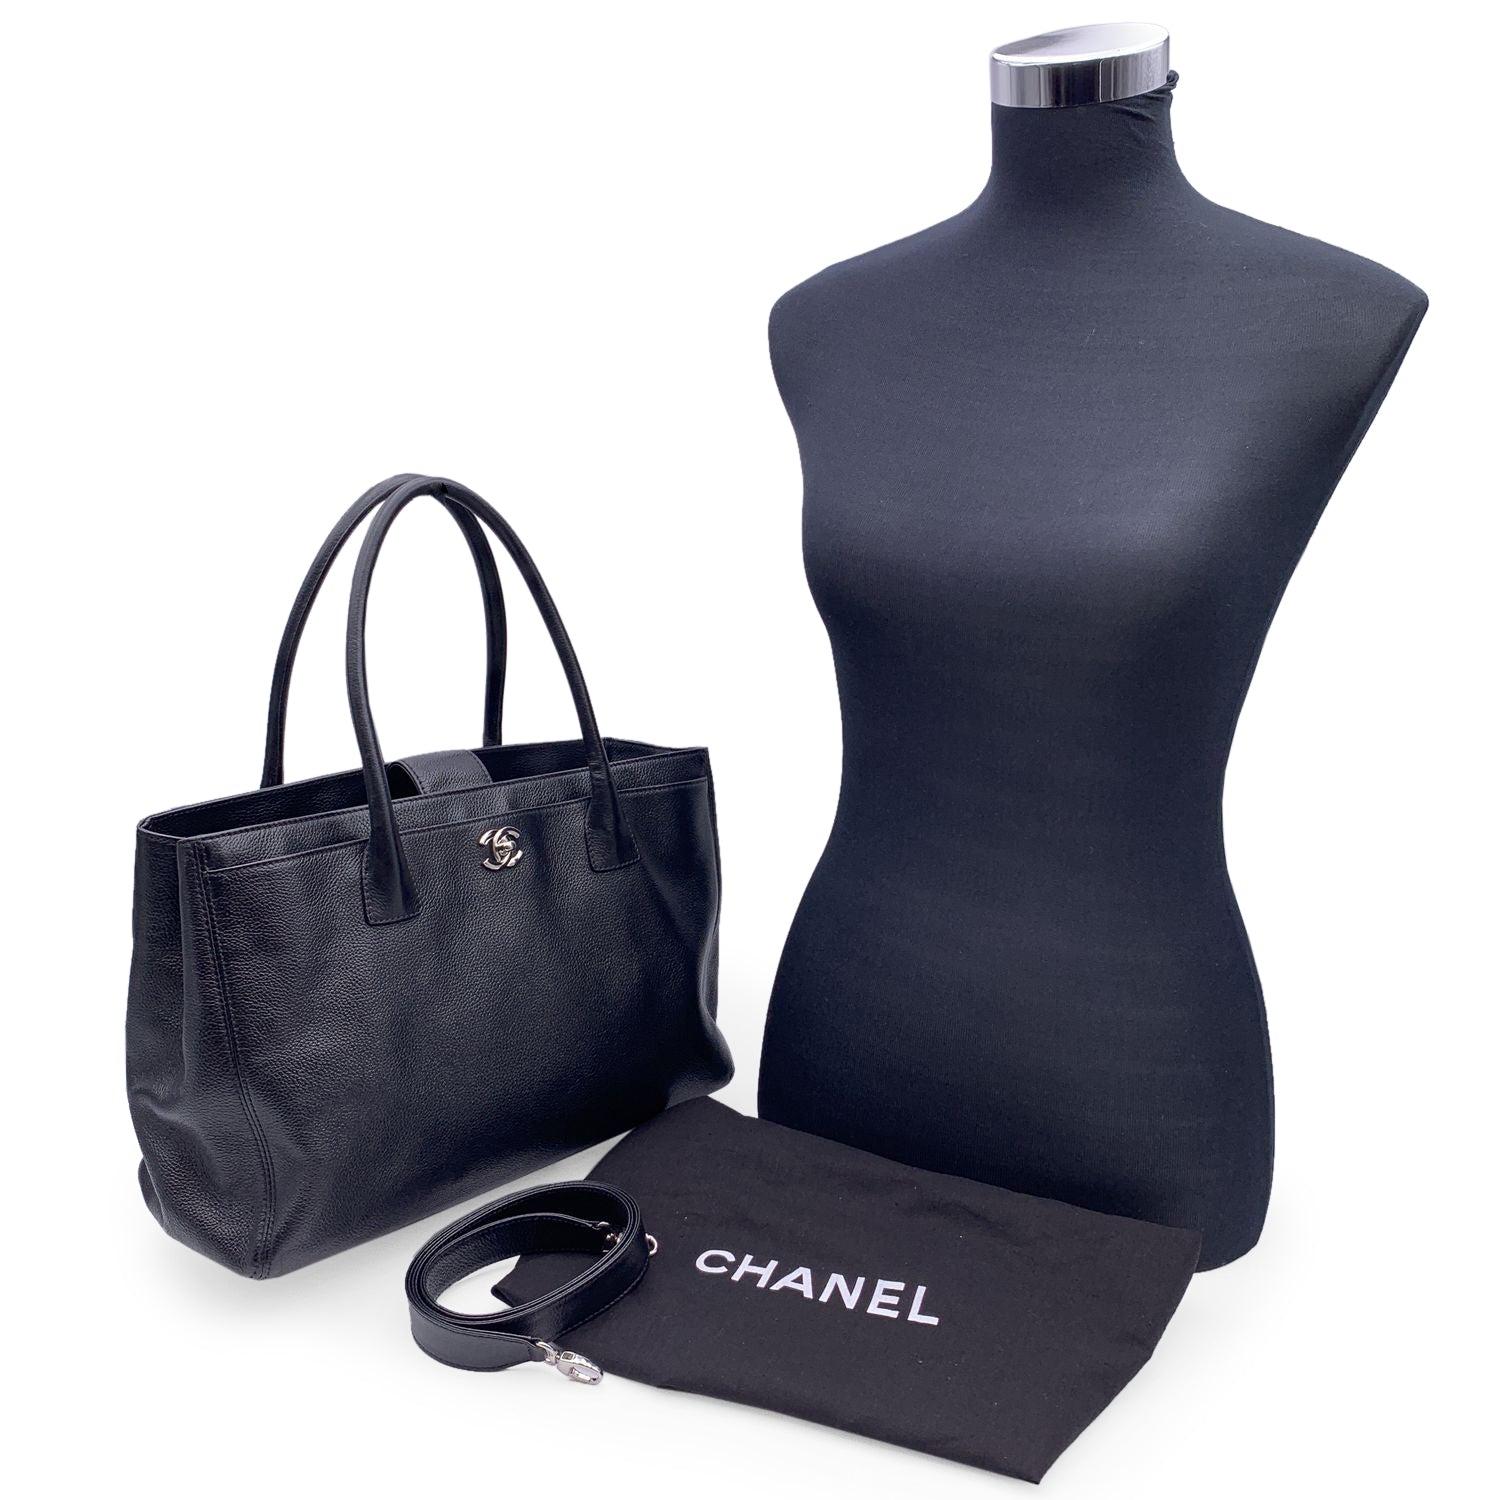 Stunning Chanel 'Executive' Tote Bag in black pebbled leather. Period/Era: 2010/2011. Silver metal CC - CHANEL logo on the front. Double top handles and removable shoulder strap. Double magnetic button closure on top. Front and rear pocket. Black